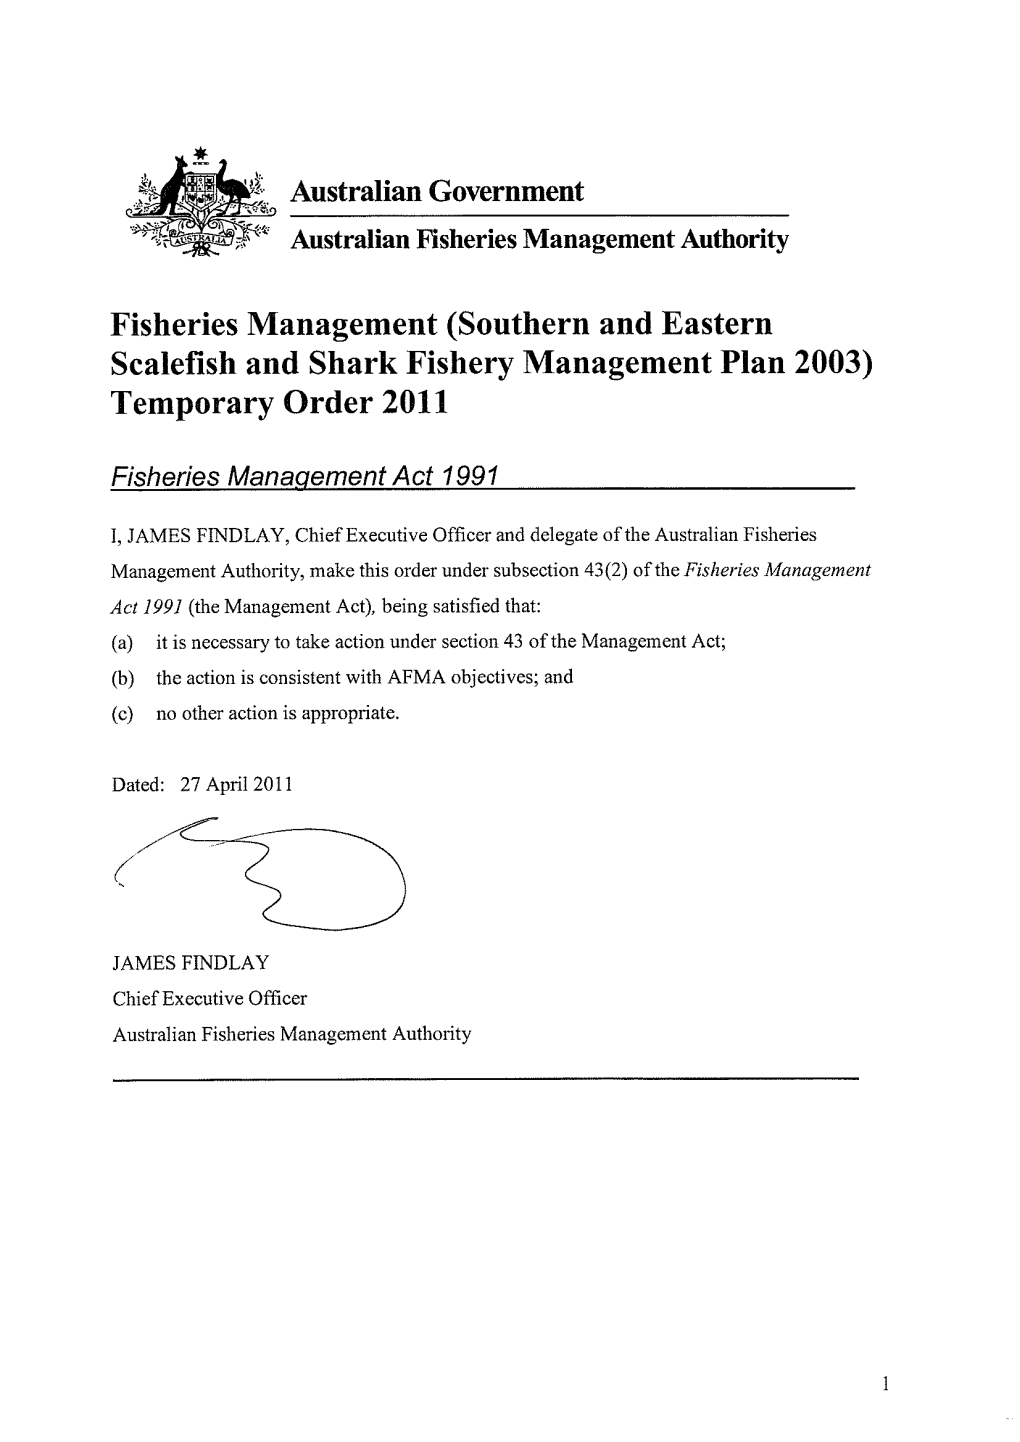 Fisheries Management (Southern and Scalefish and Shark Fishery Managem Temporary Order 2011 E E Astern Nt Plan 2003)